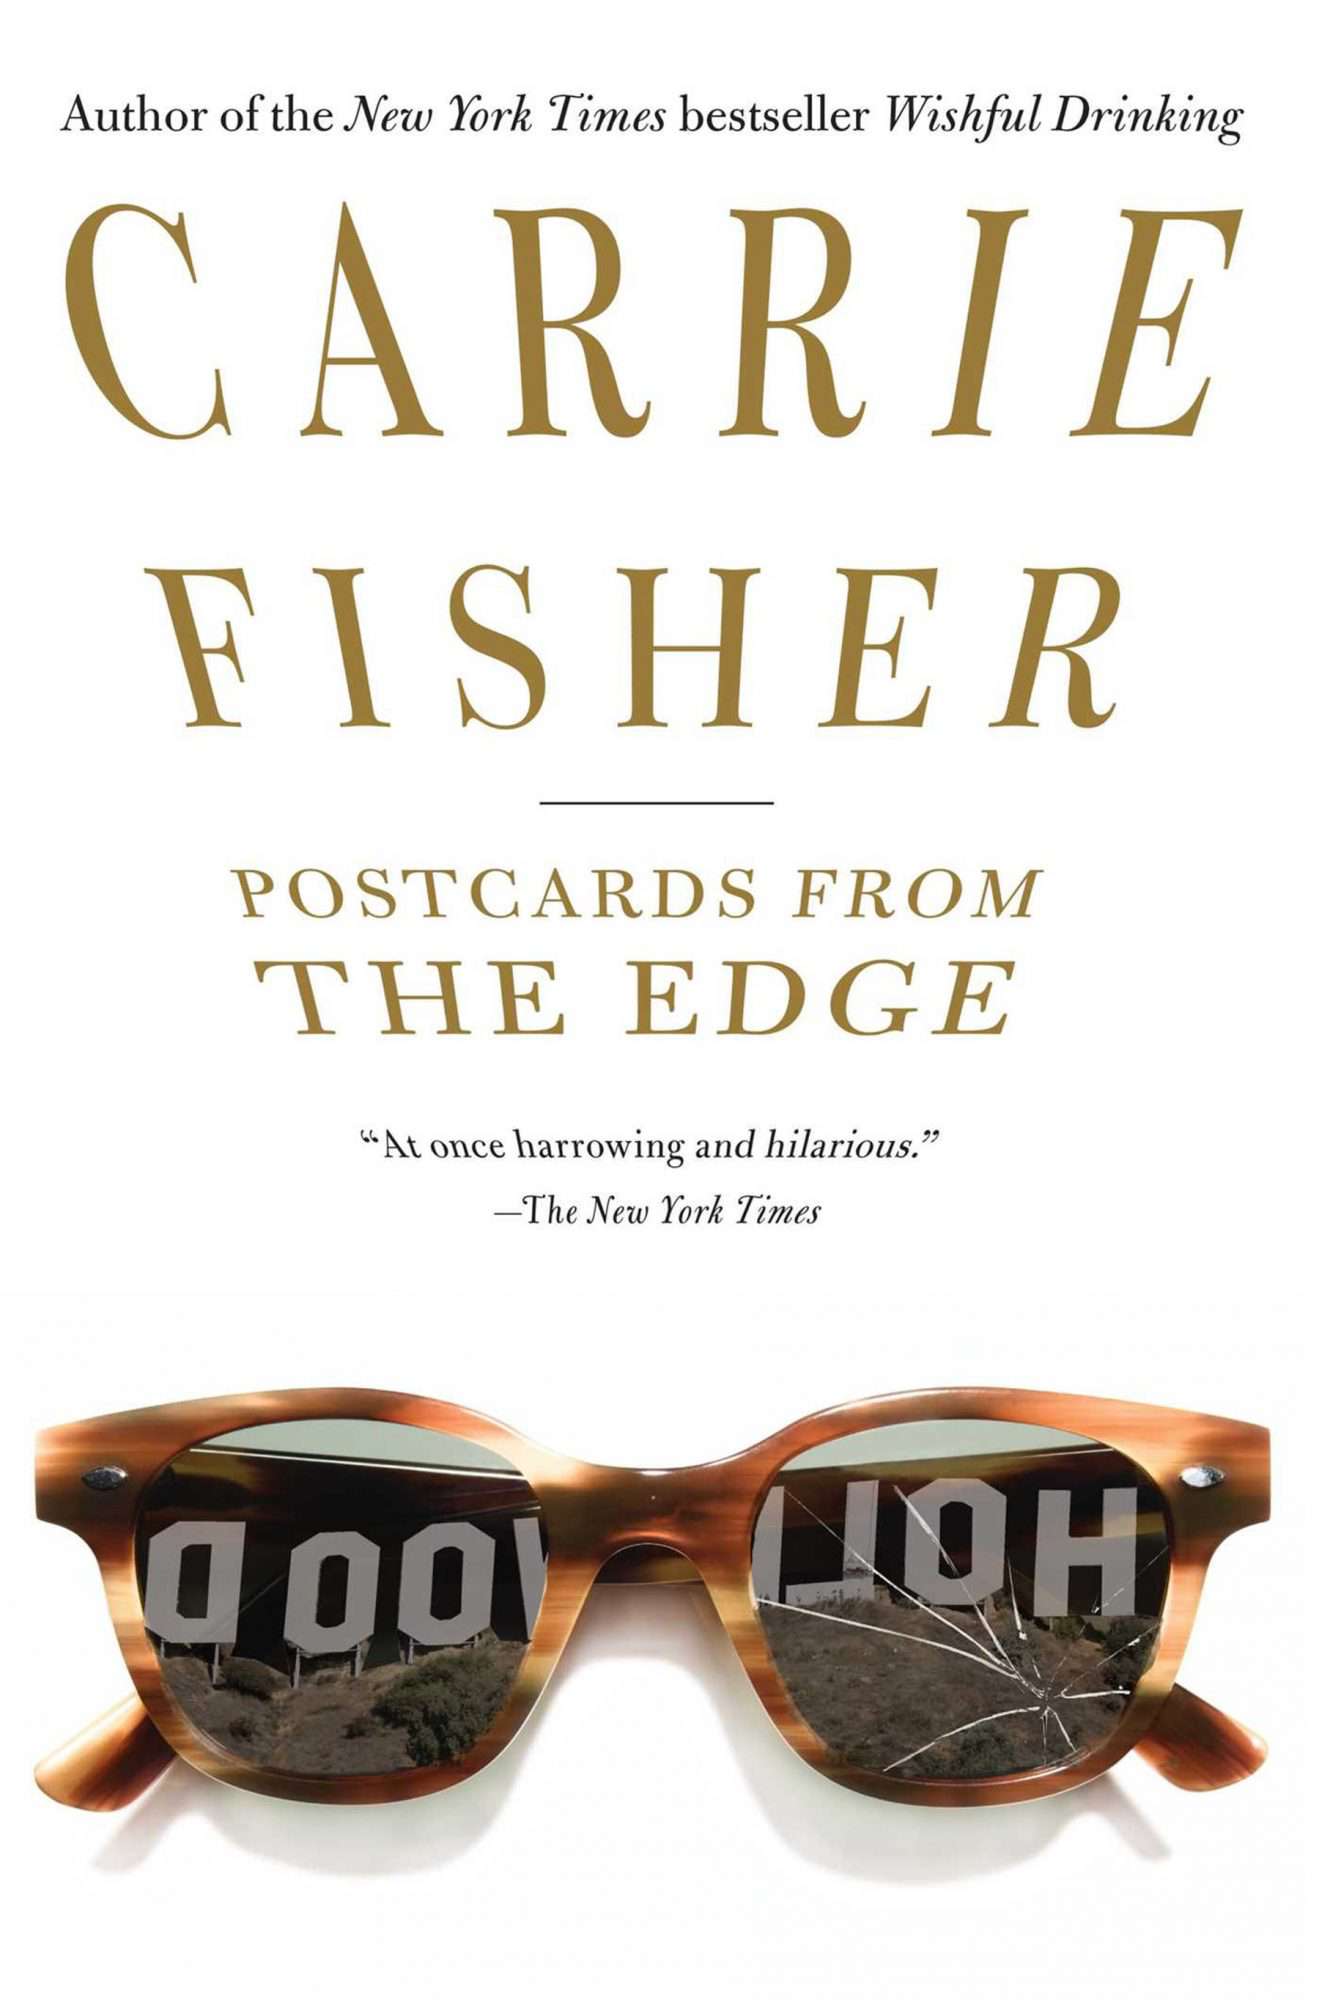 Carrie Fisher, Postcards from the Edge